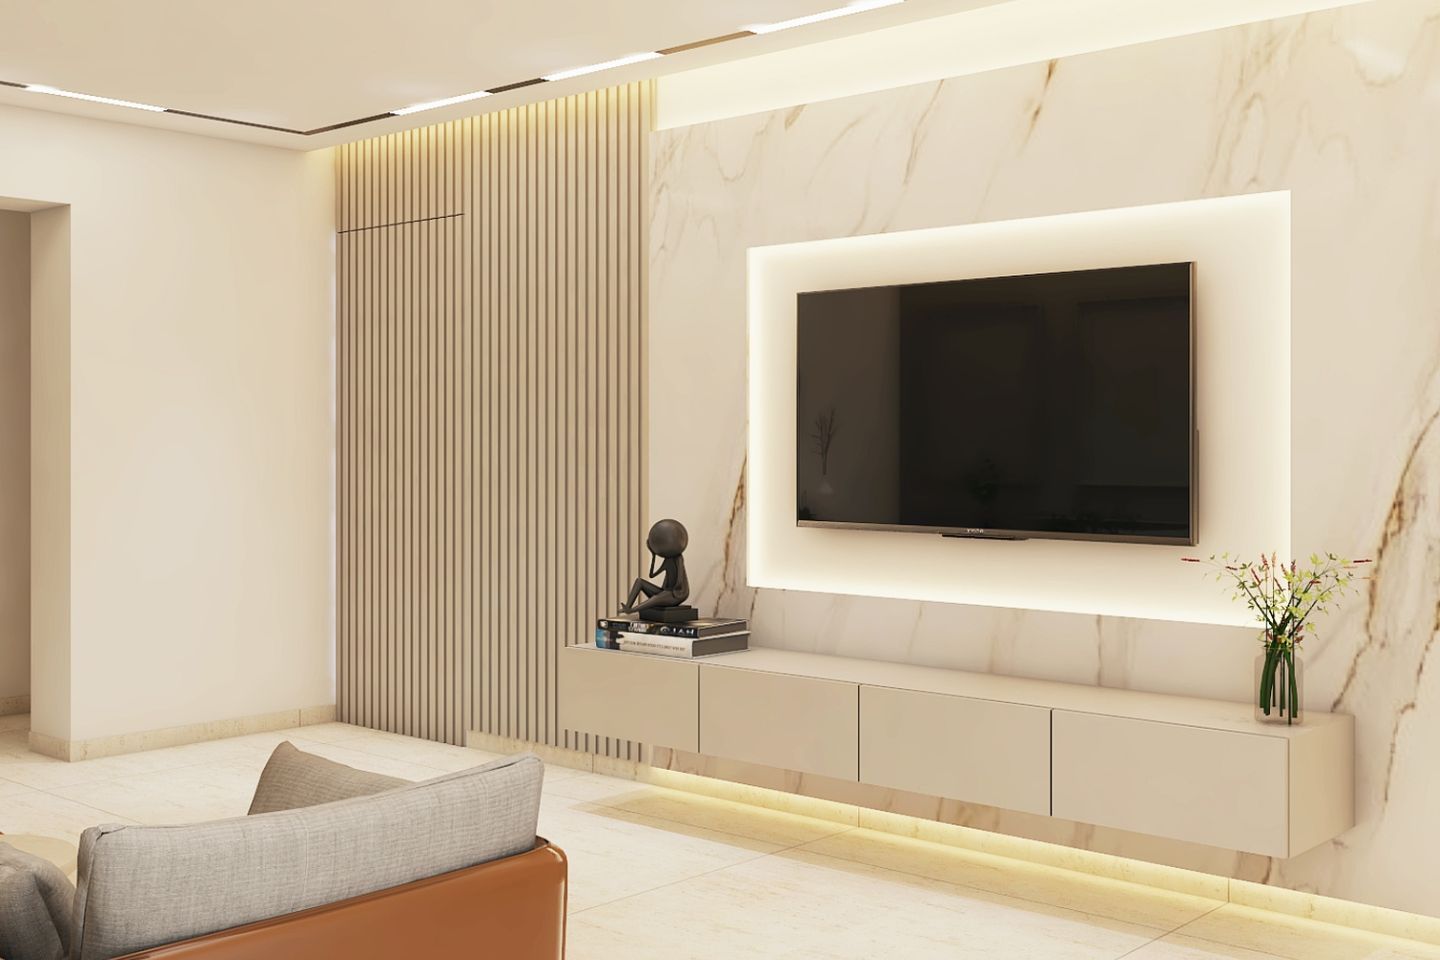 Irish Cream-Toned Floating TV Console With Backlit Panel, Marble And Cream-Toned Panelling - Livspace